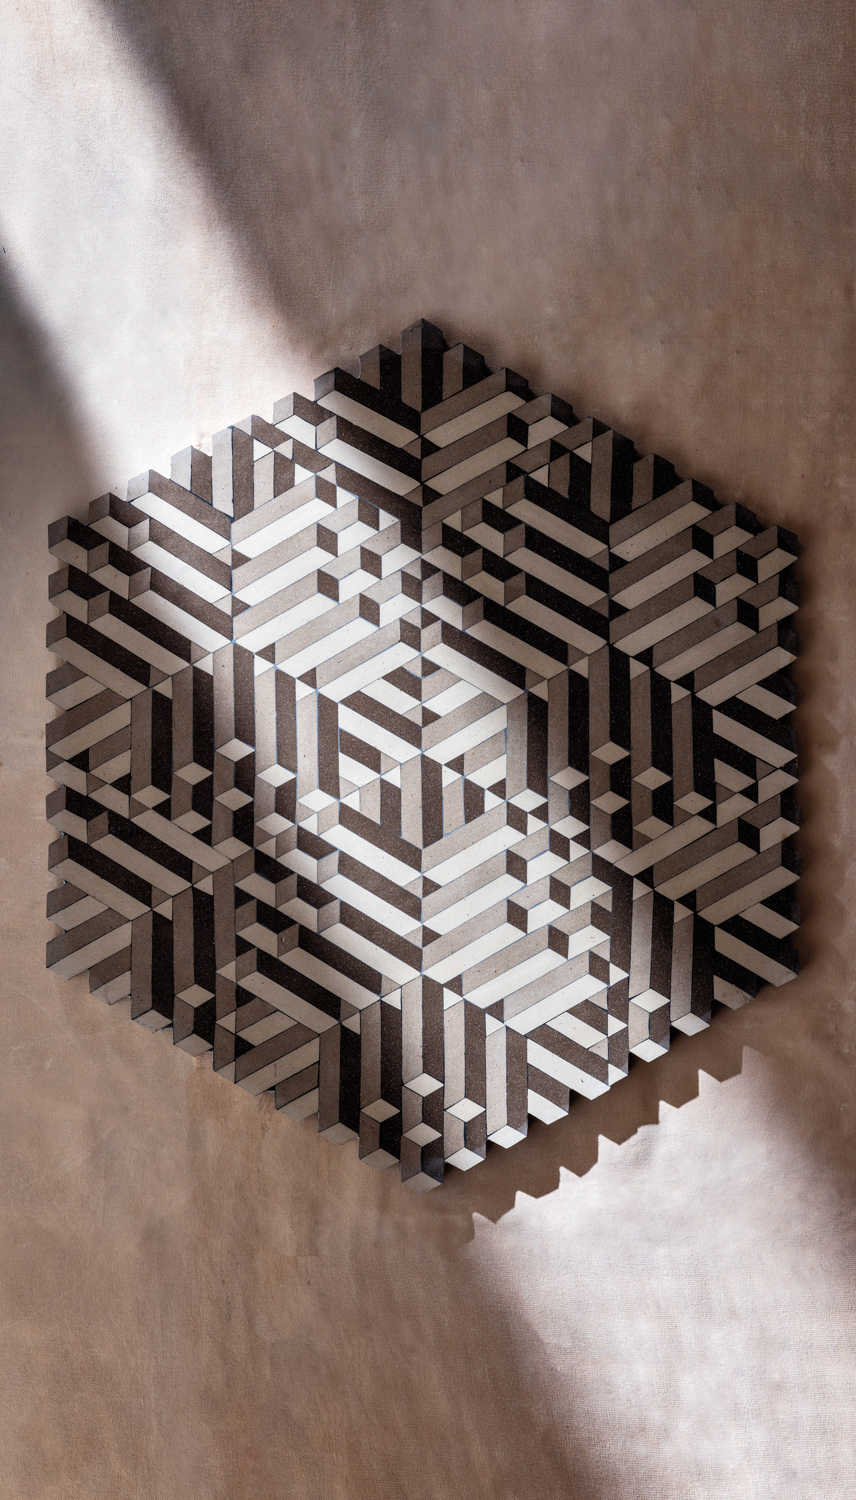 wooden geometric structures by Cody Hoyt